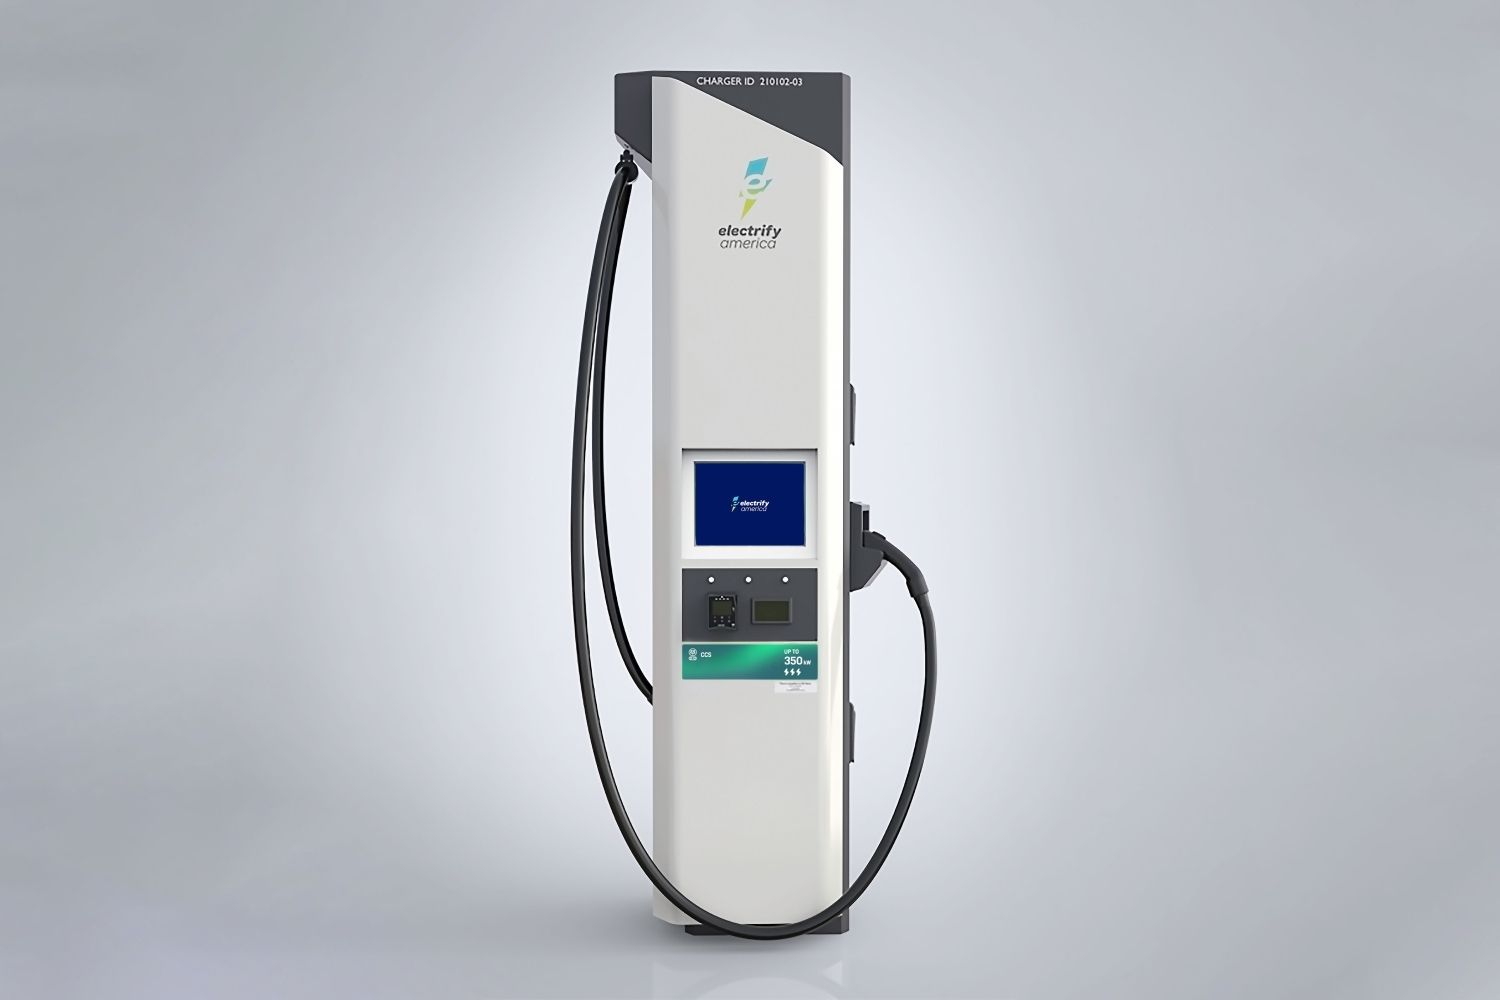 redesigned electrify america fast chargers